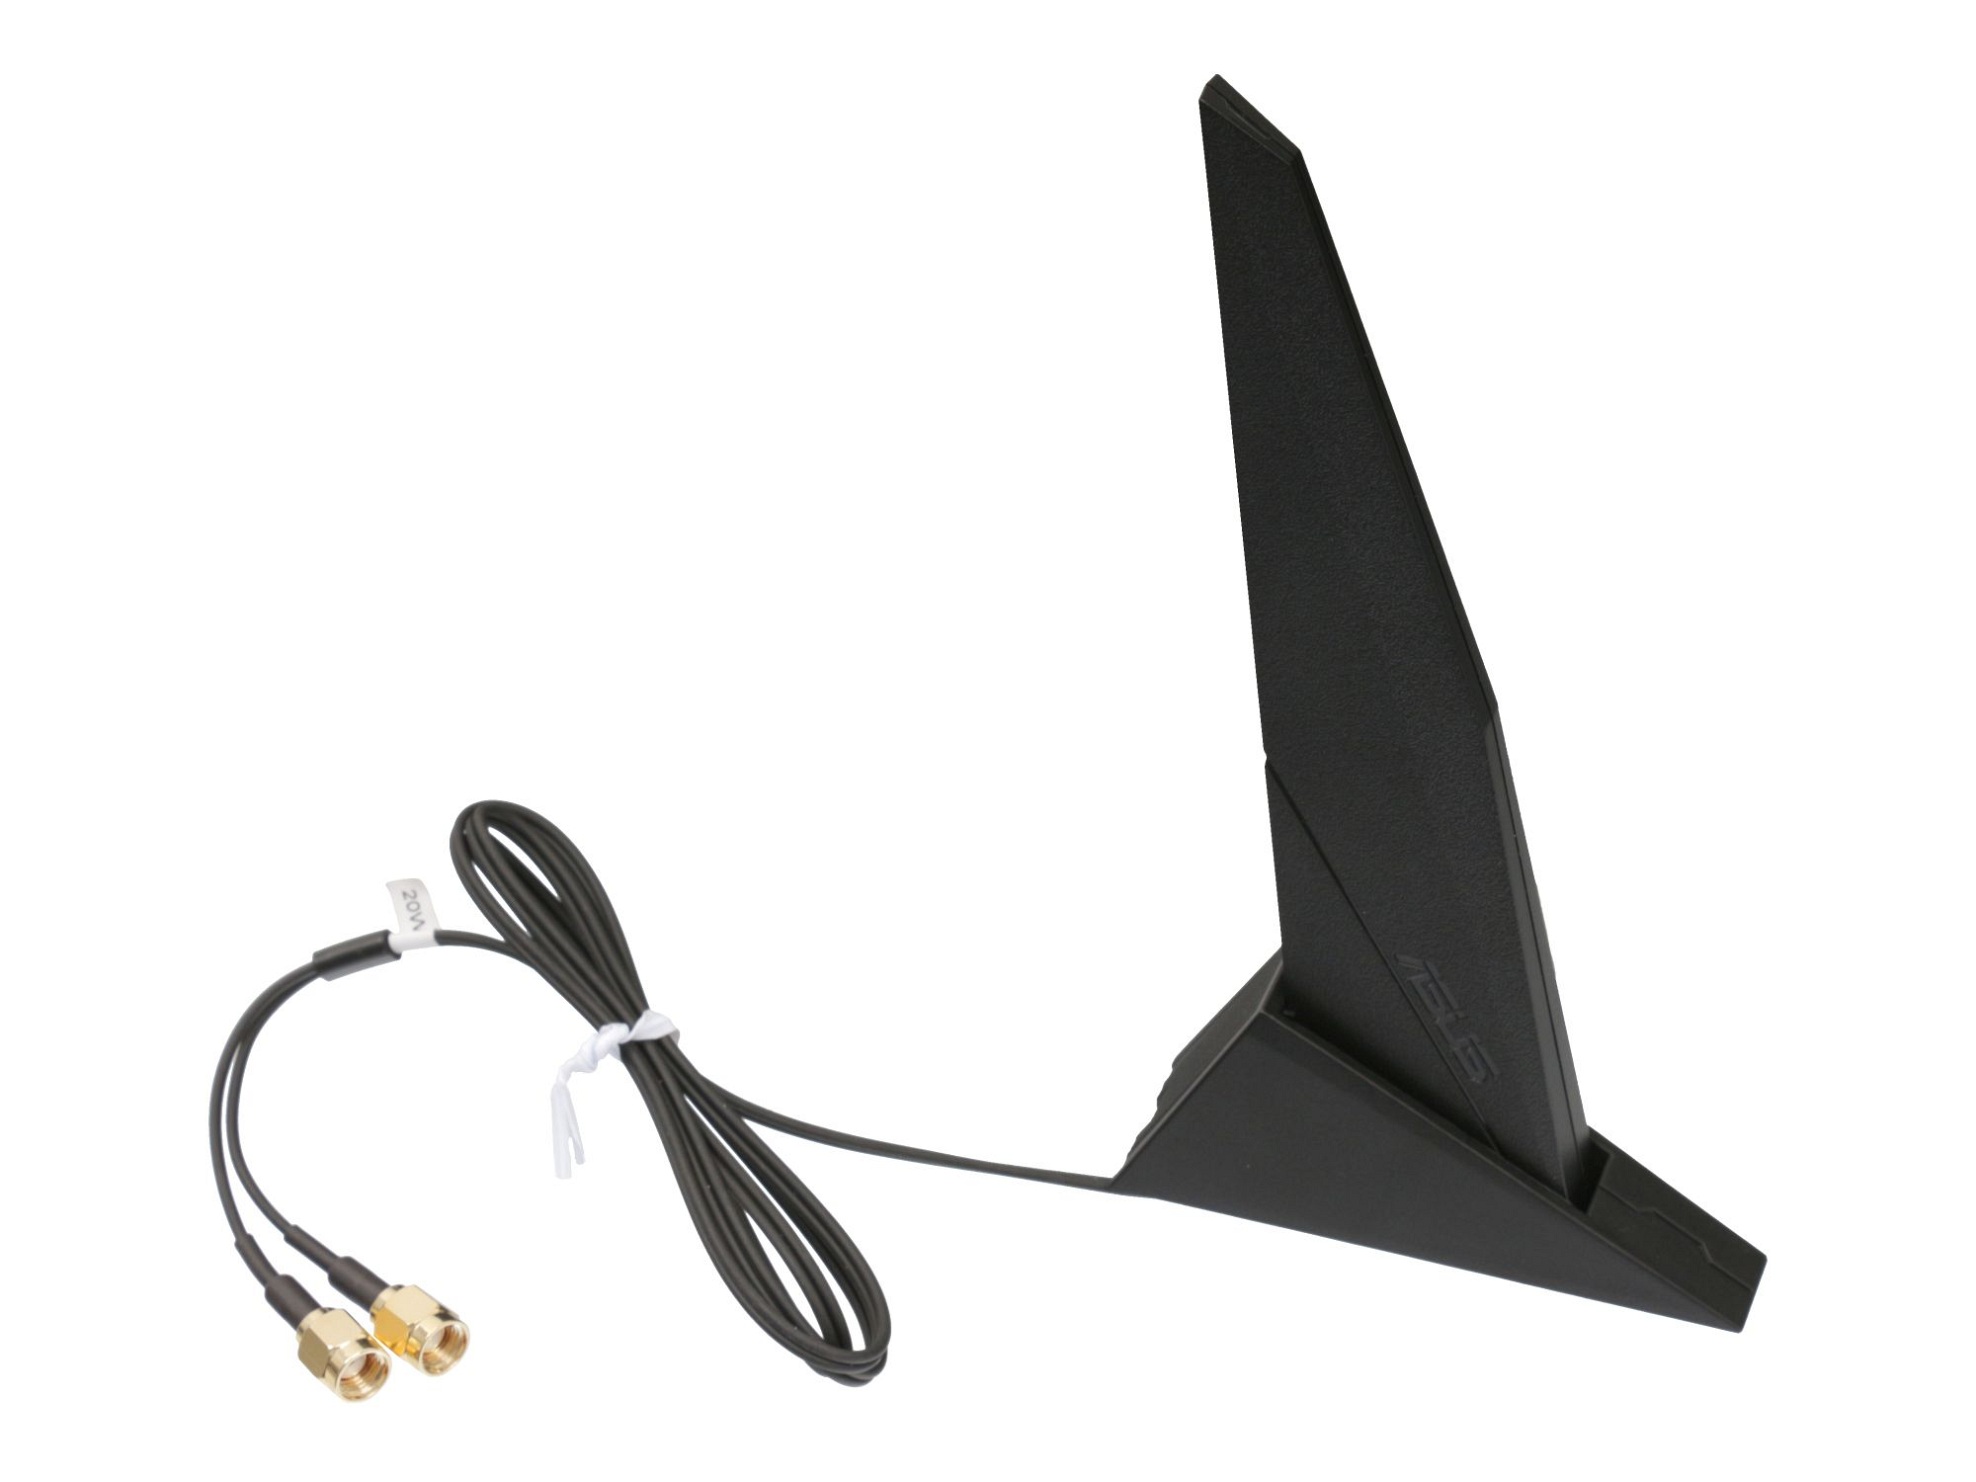 Externe Asus RP-SMA DIPOLE Antenne für Asus ROG Strix B560-F Gaming WIFI